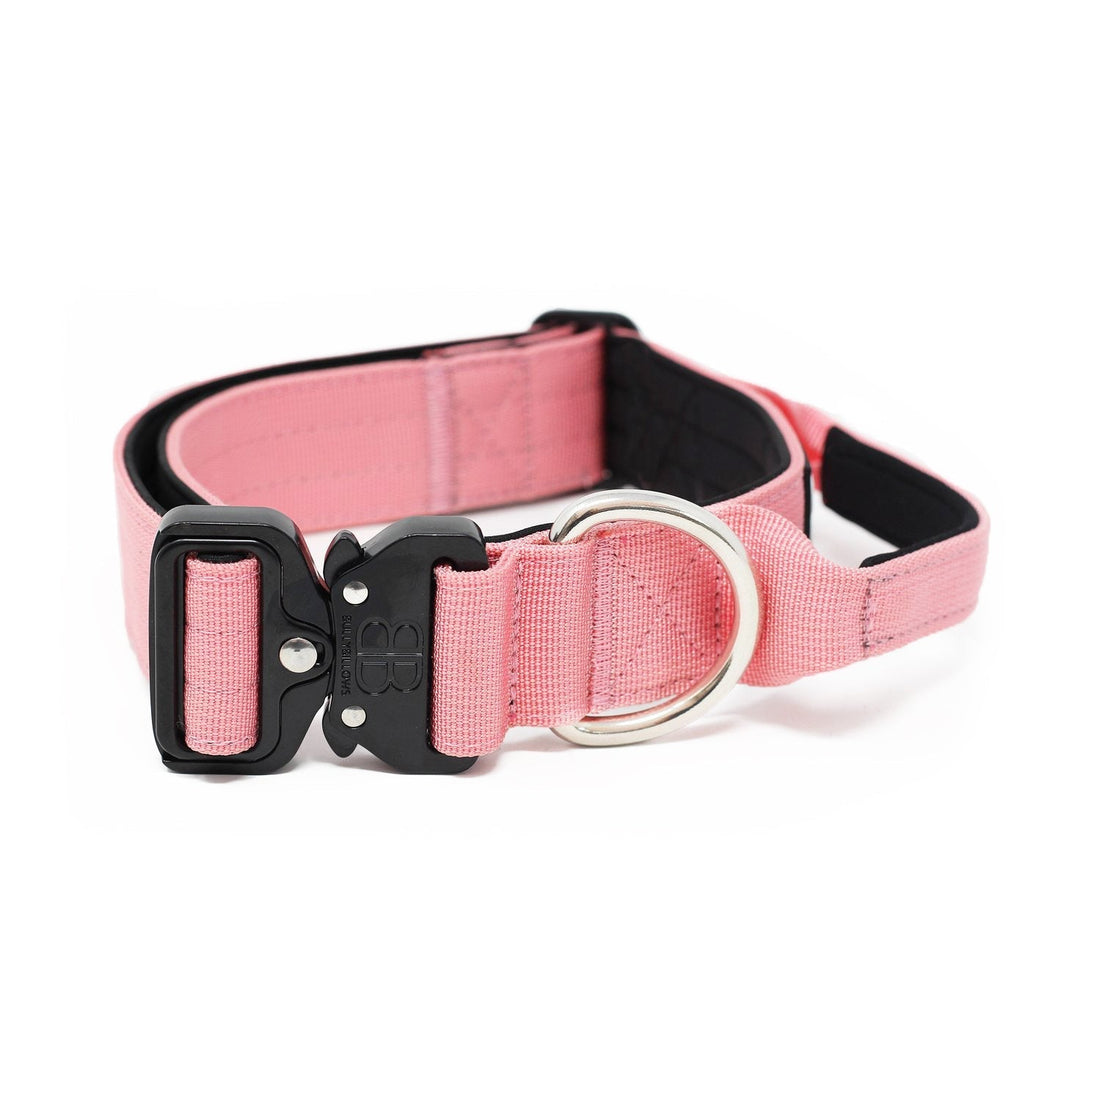 Bully Billows 1.5" (4CM) Combat Collar with handle - Pink (Padded) - Bulletproof Pet Products Inc